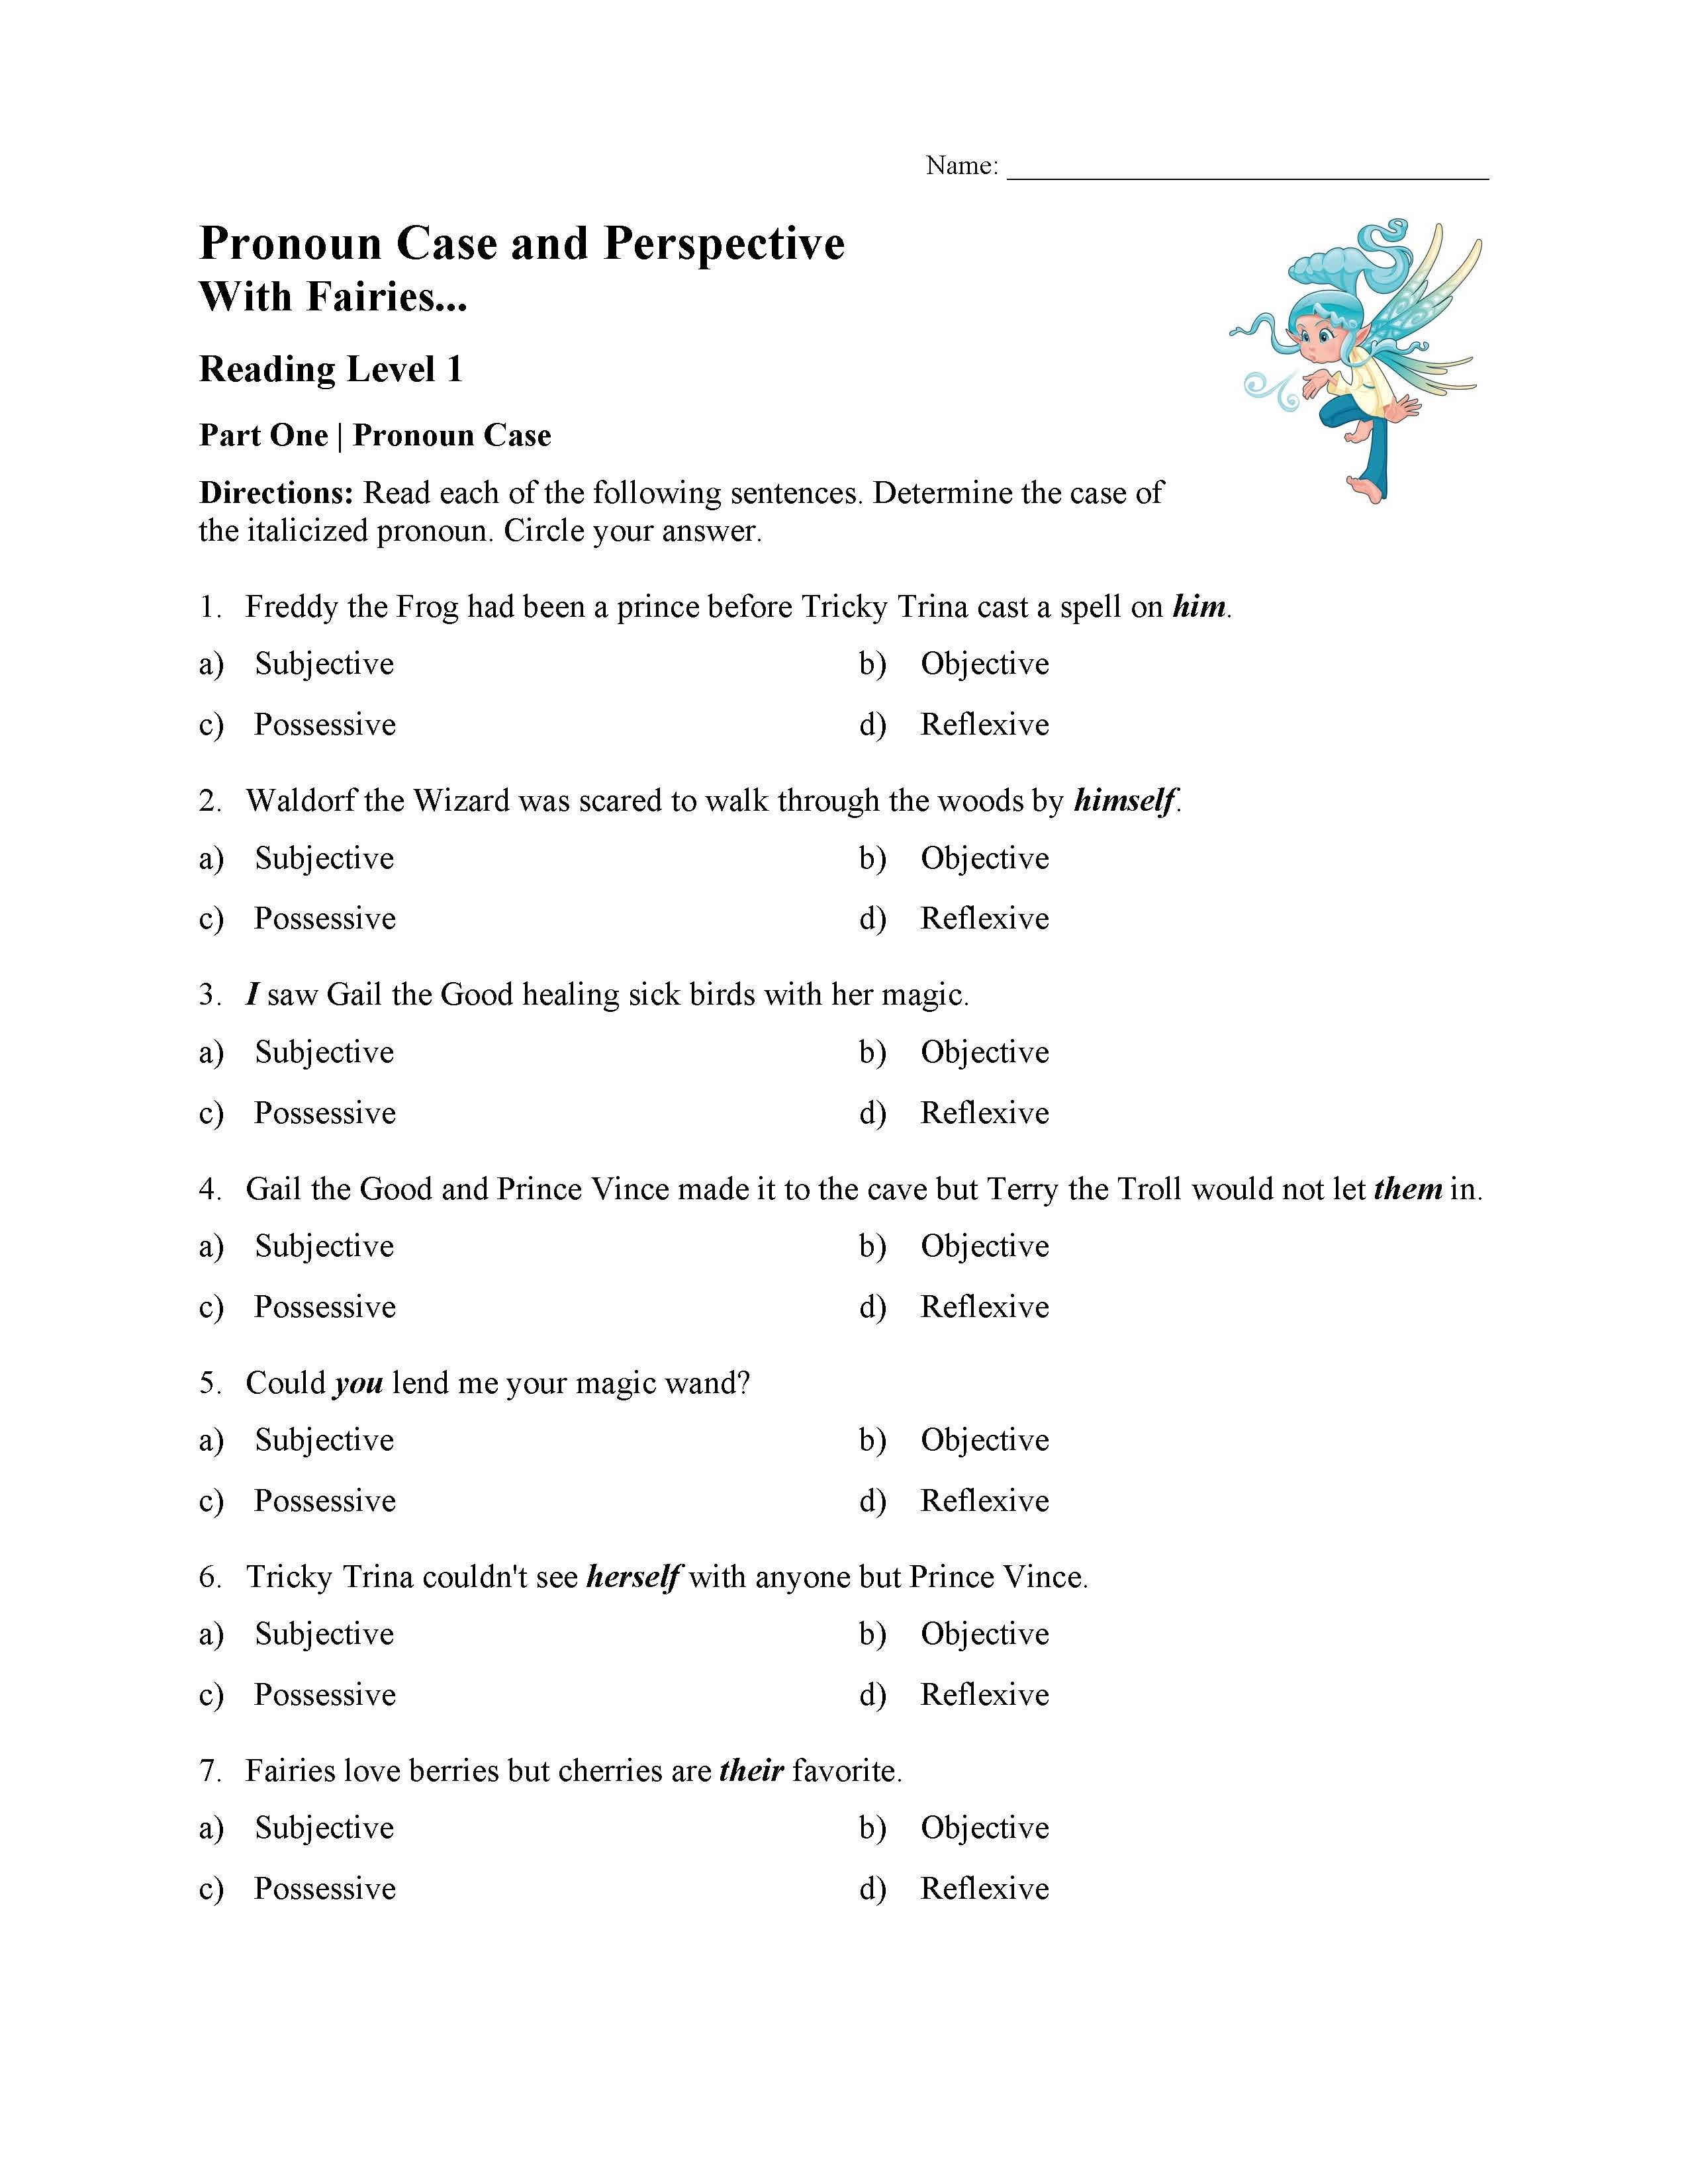 This is a preview image of the Pronoun Case and Perspective Test - With Fairies | Reading Level 1.